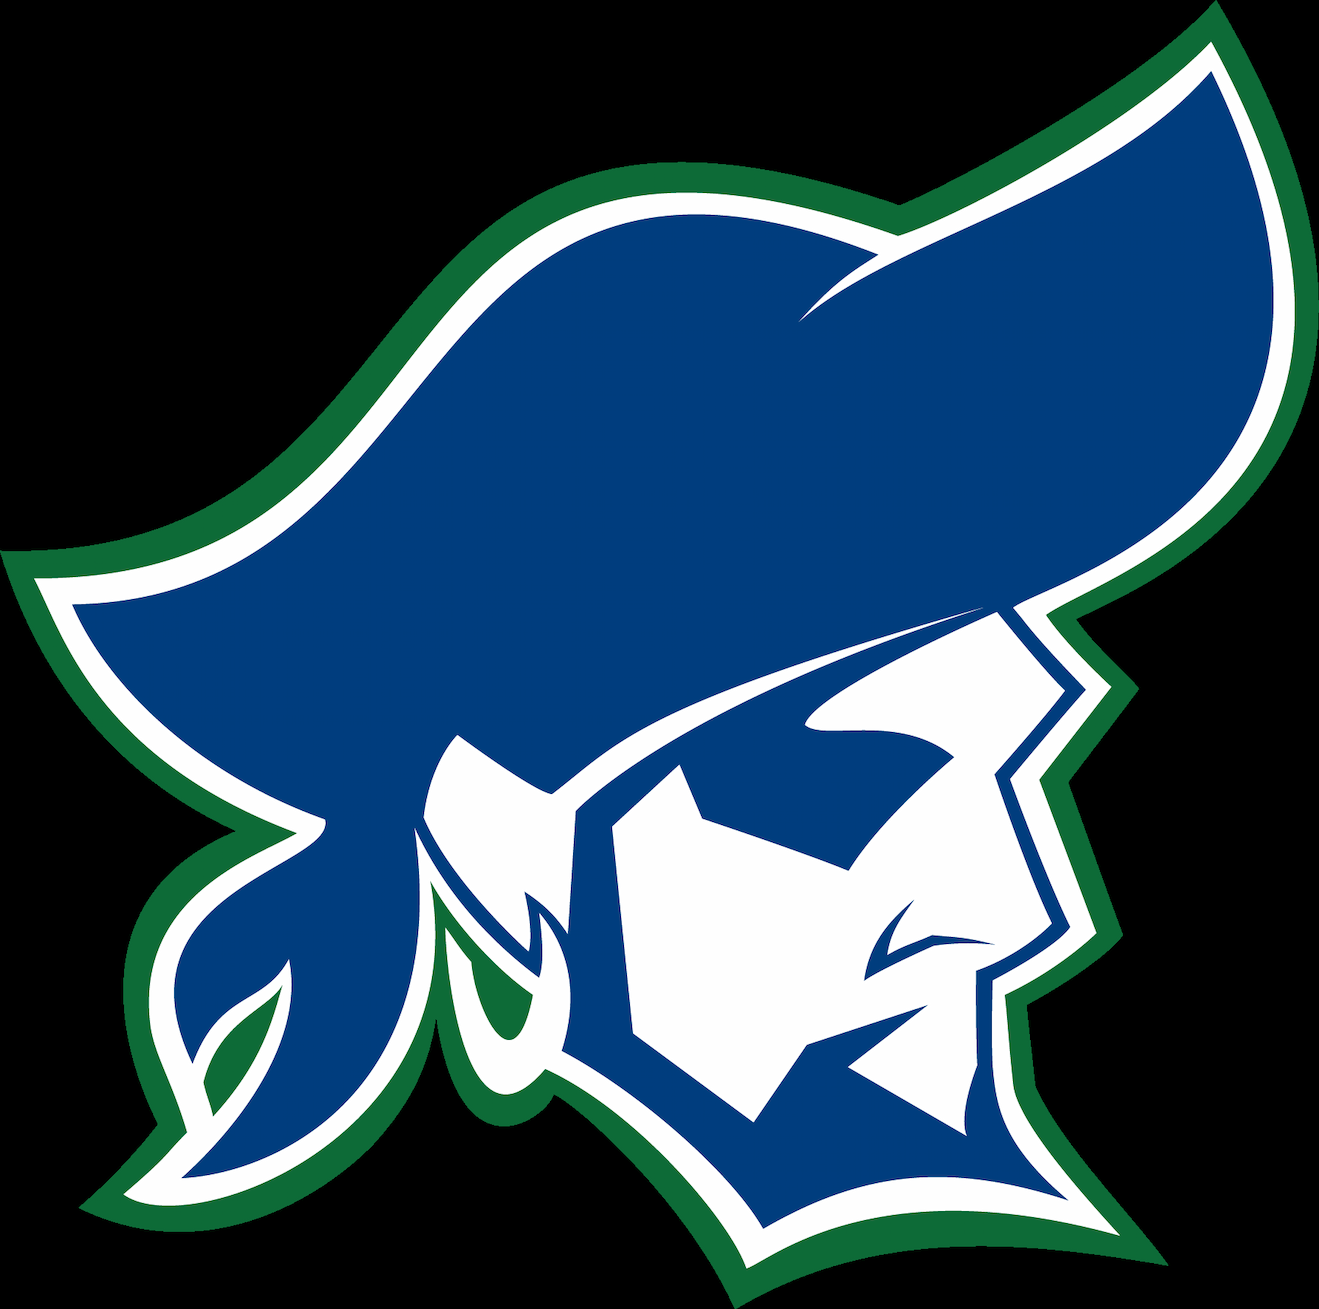 Pensacola State College – Hartsell Arena